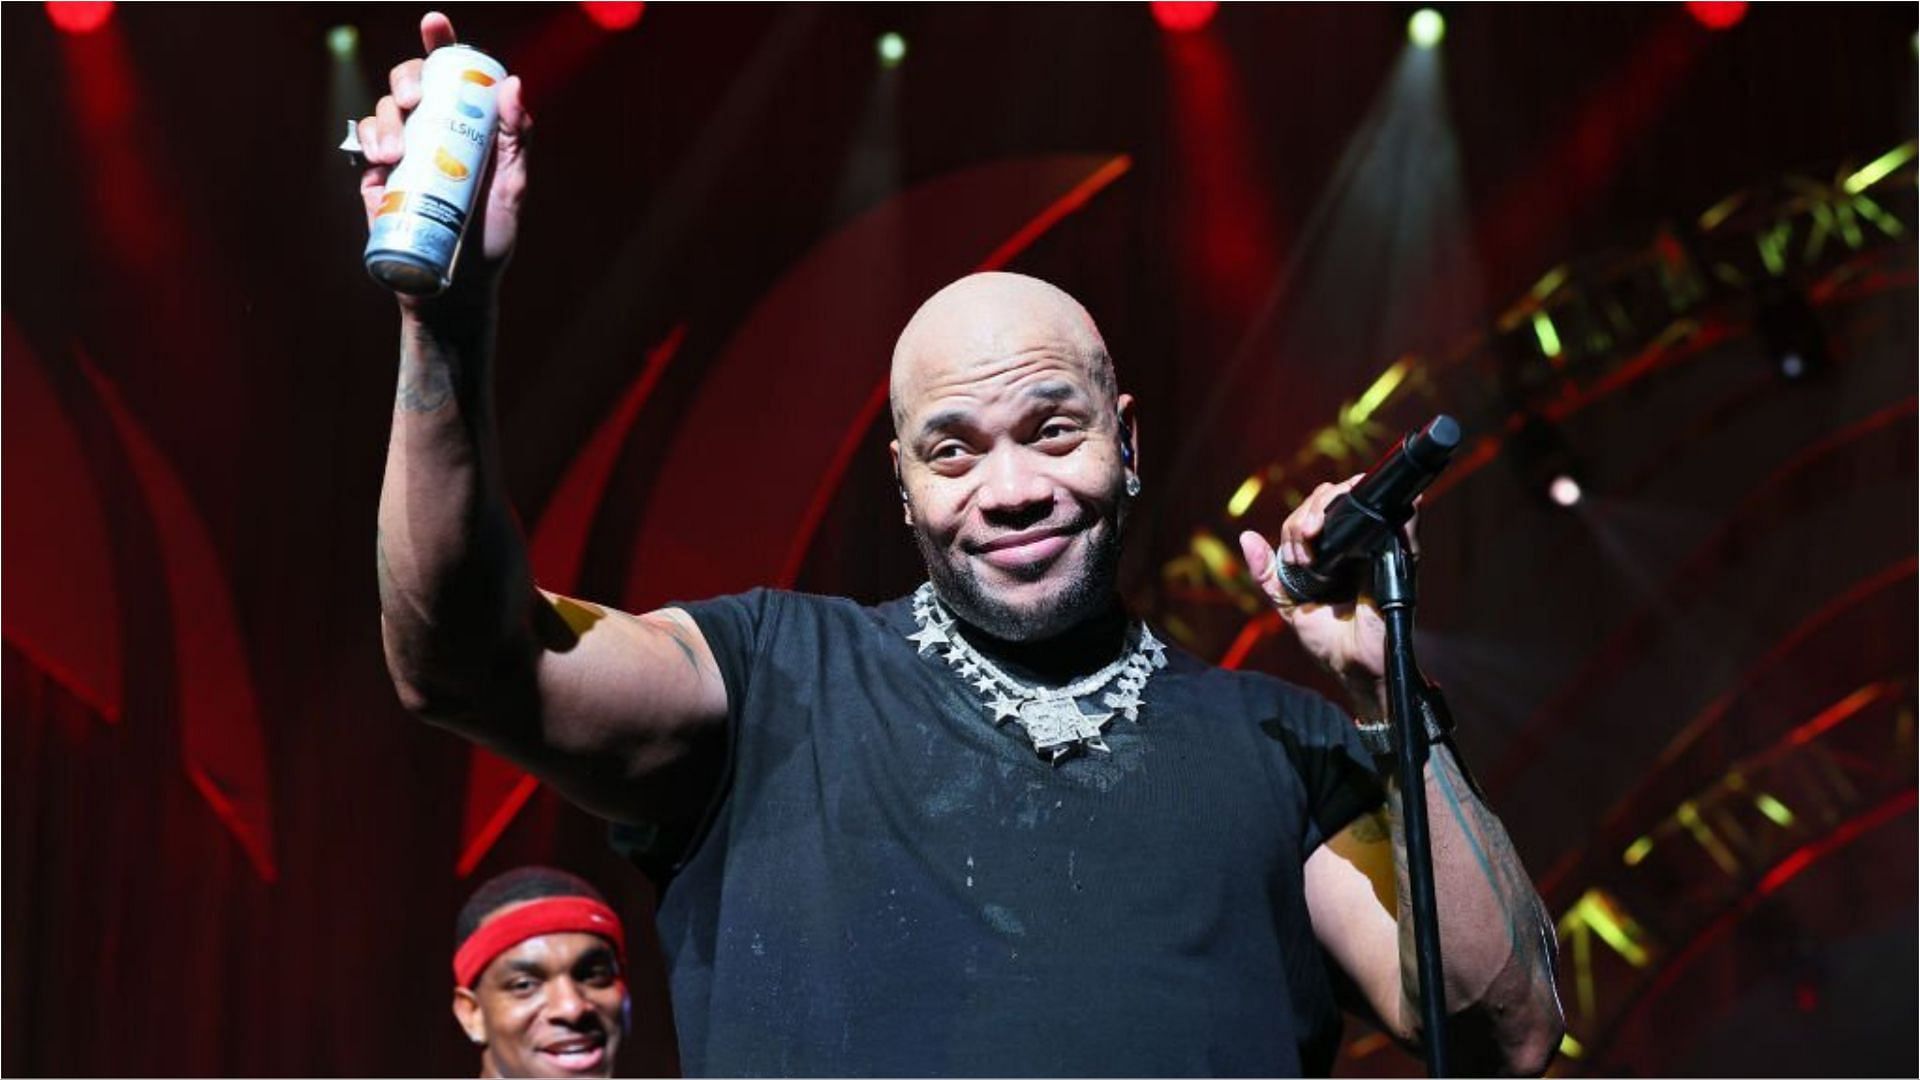 Flo Rida filed a lawsuit against Celsius in 2021 (Image via Leon Bennett/Getty Images)